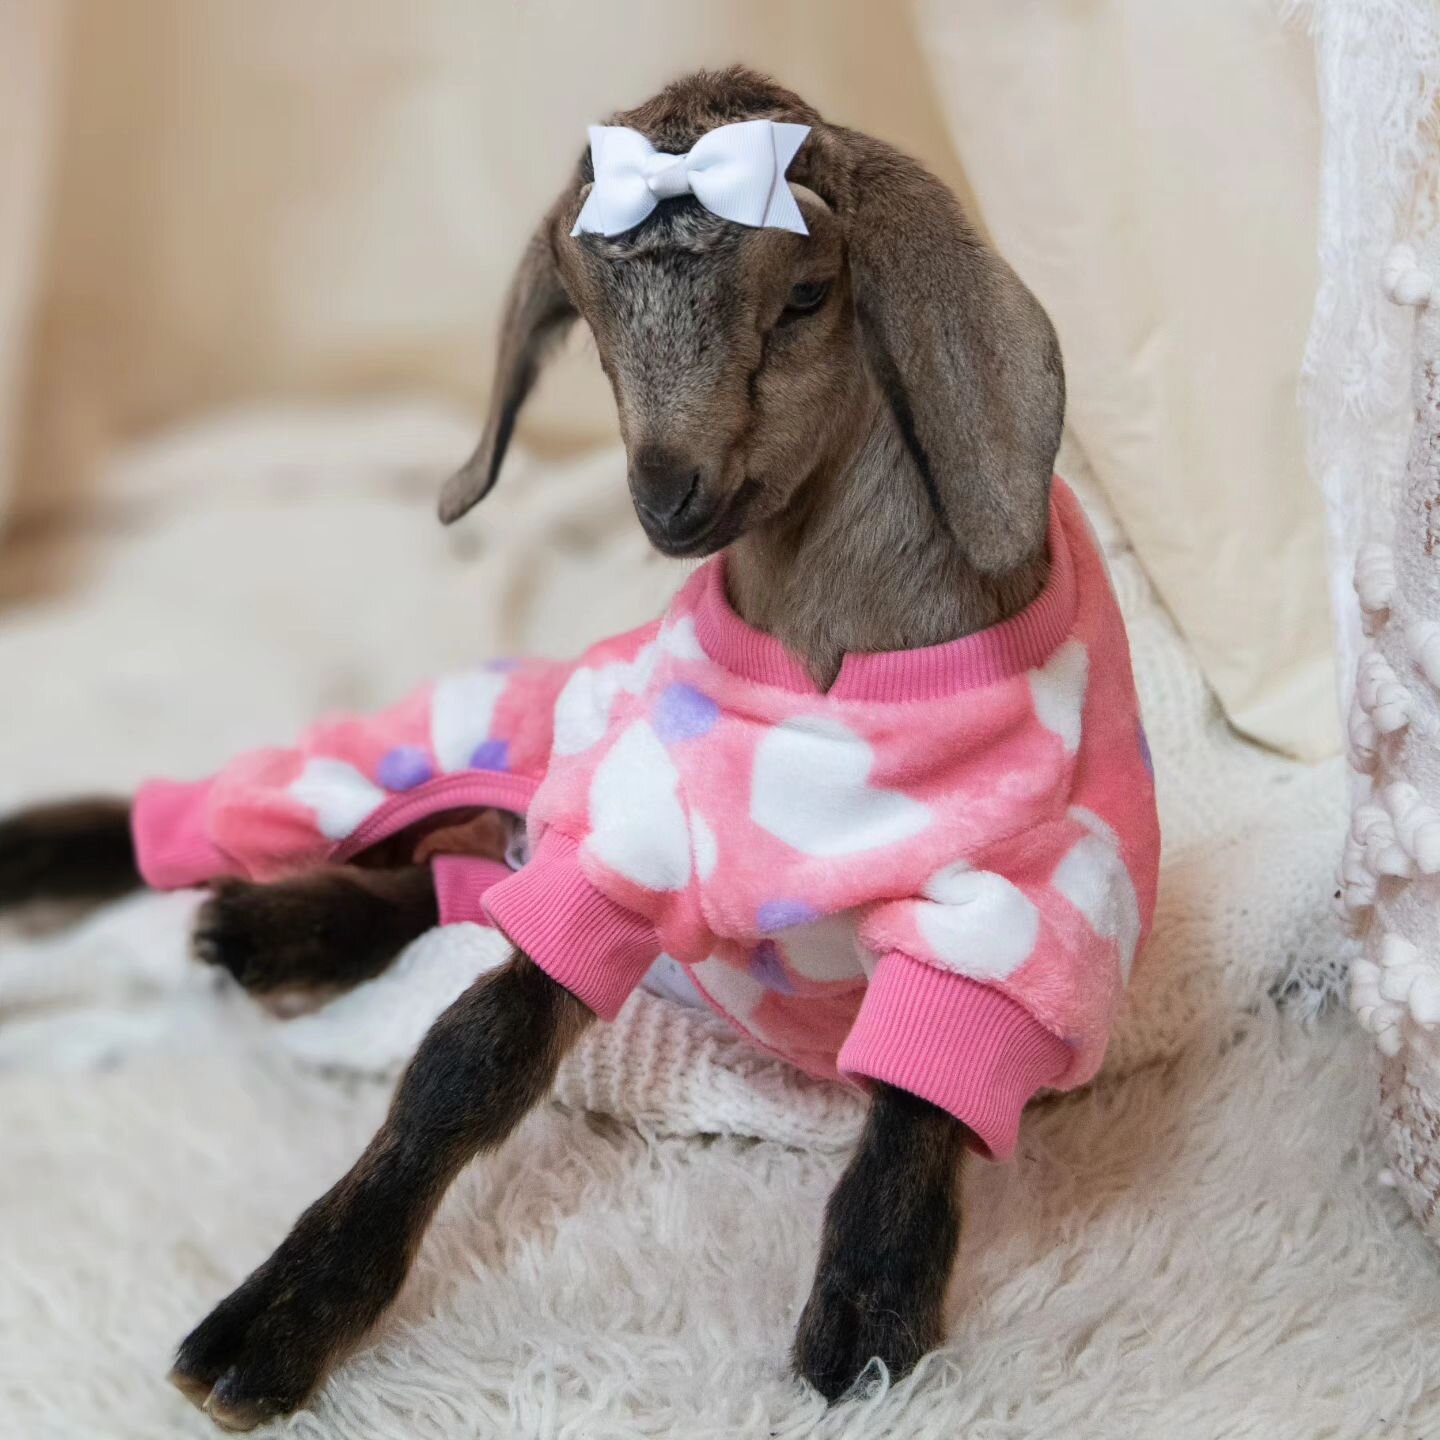 ❤️❤️You&rsquo;ve Goat Mail!
Send a 🐐-A-Gram this Valentine&rsquo;s Day to your loved one, co-worker or boss!

100% laughter and smiles guaranteed!
Two baby Valentine goats delivered to your home, work place, or anywhere, only $125.00!
Add additional